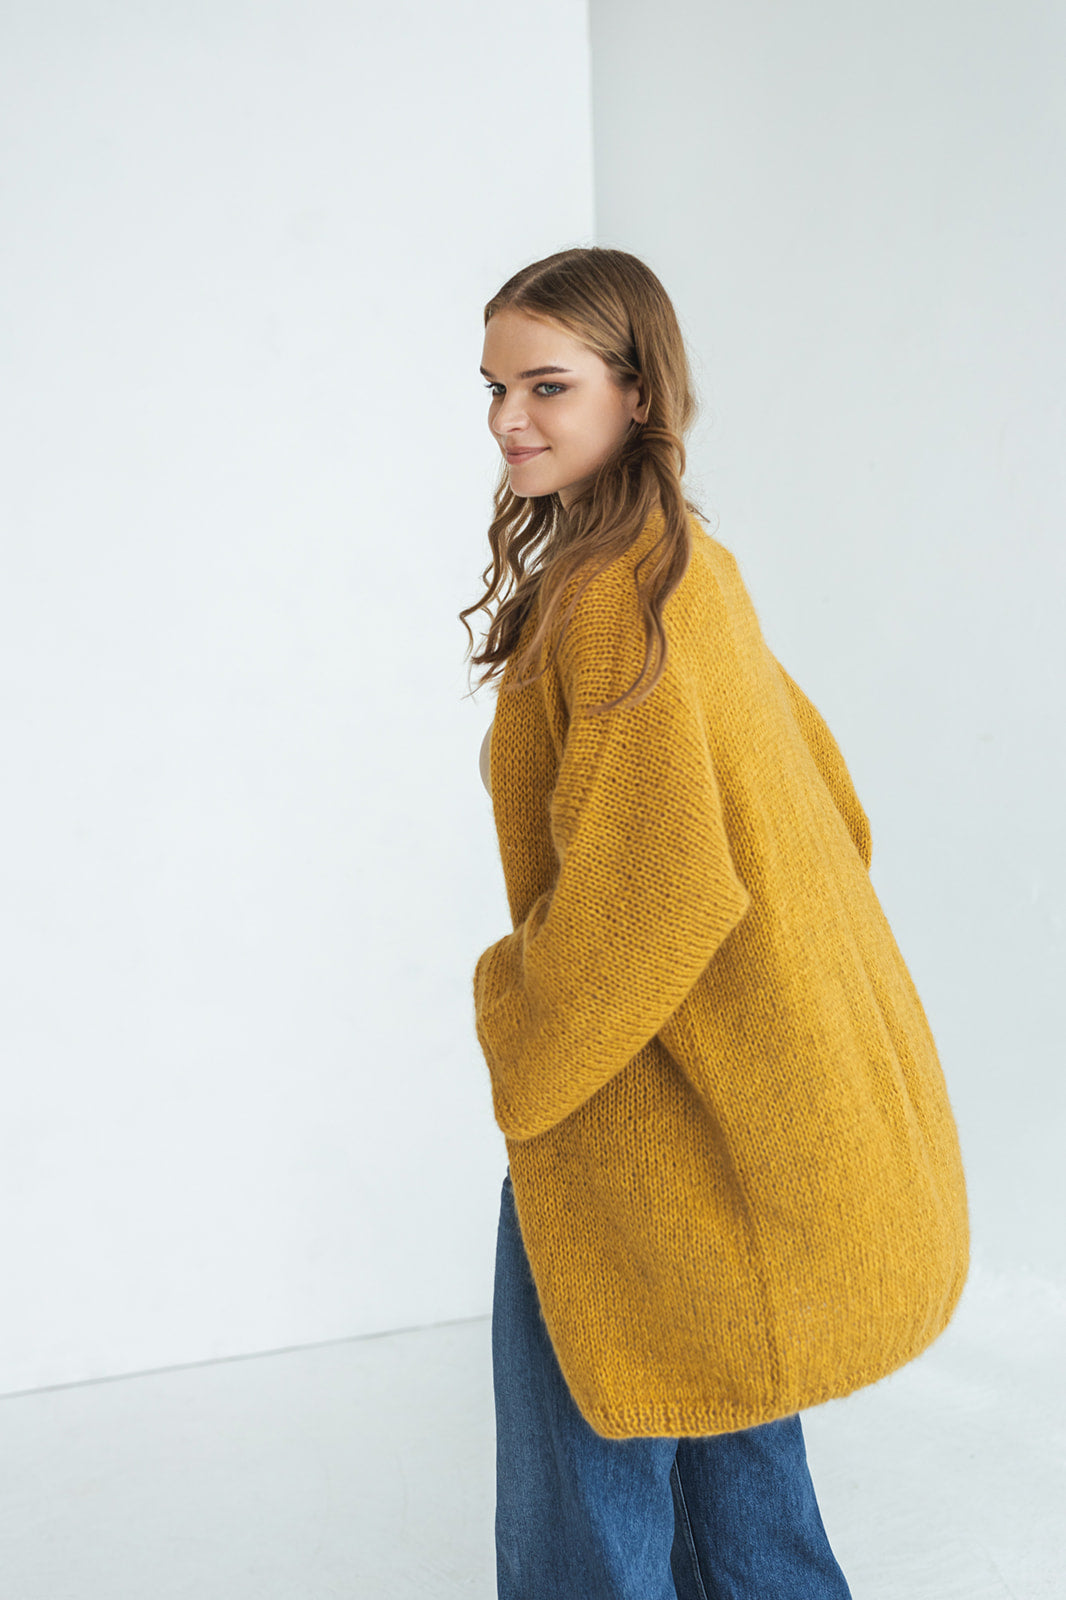 Mustard yellow kimono mohair cardigan, long fluffy minimalist alpaca blend cable knitted sweater, wide sleeves, chunky knit fuzzy coat, gift